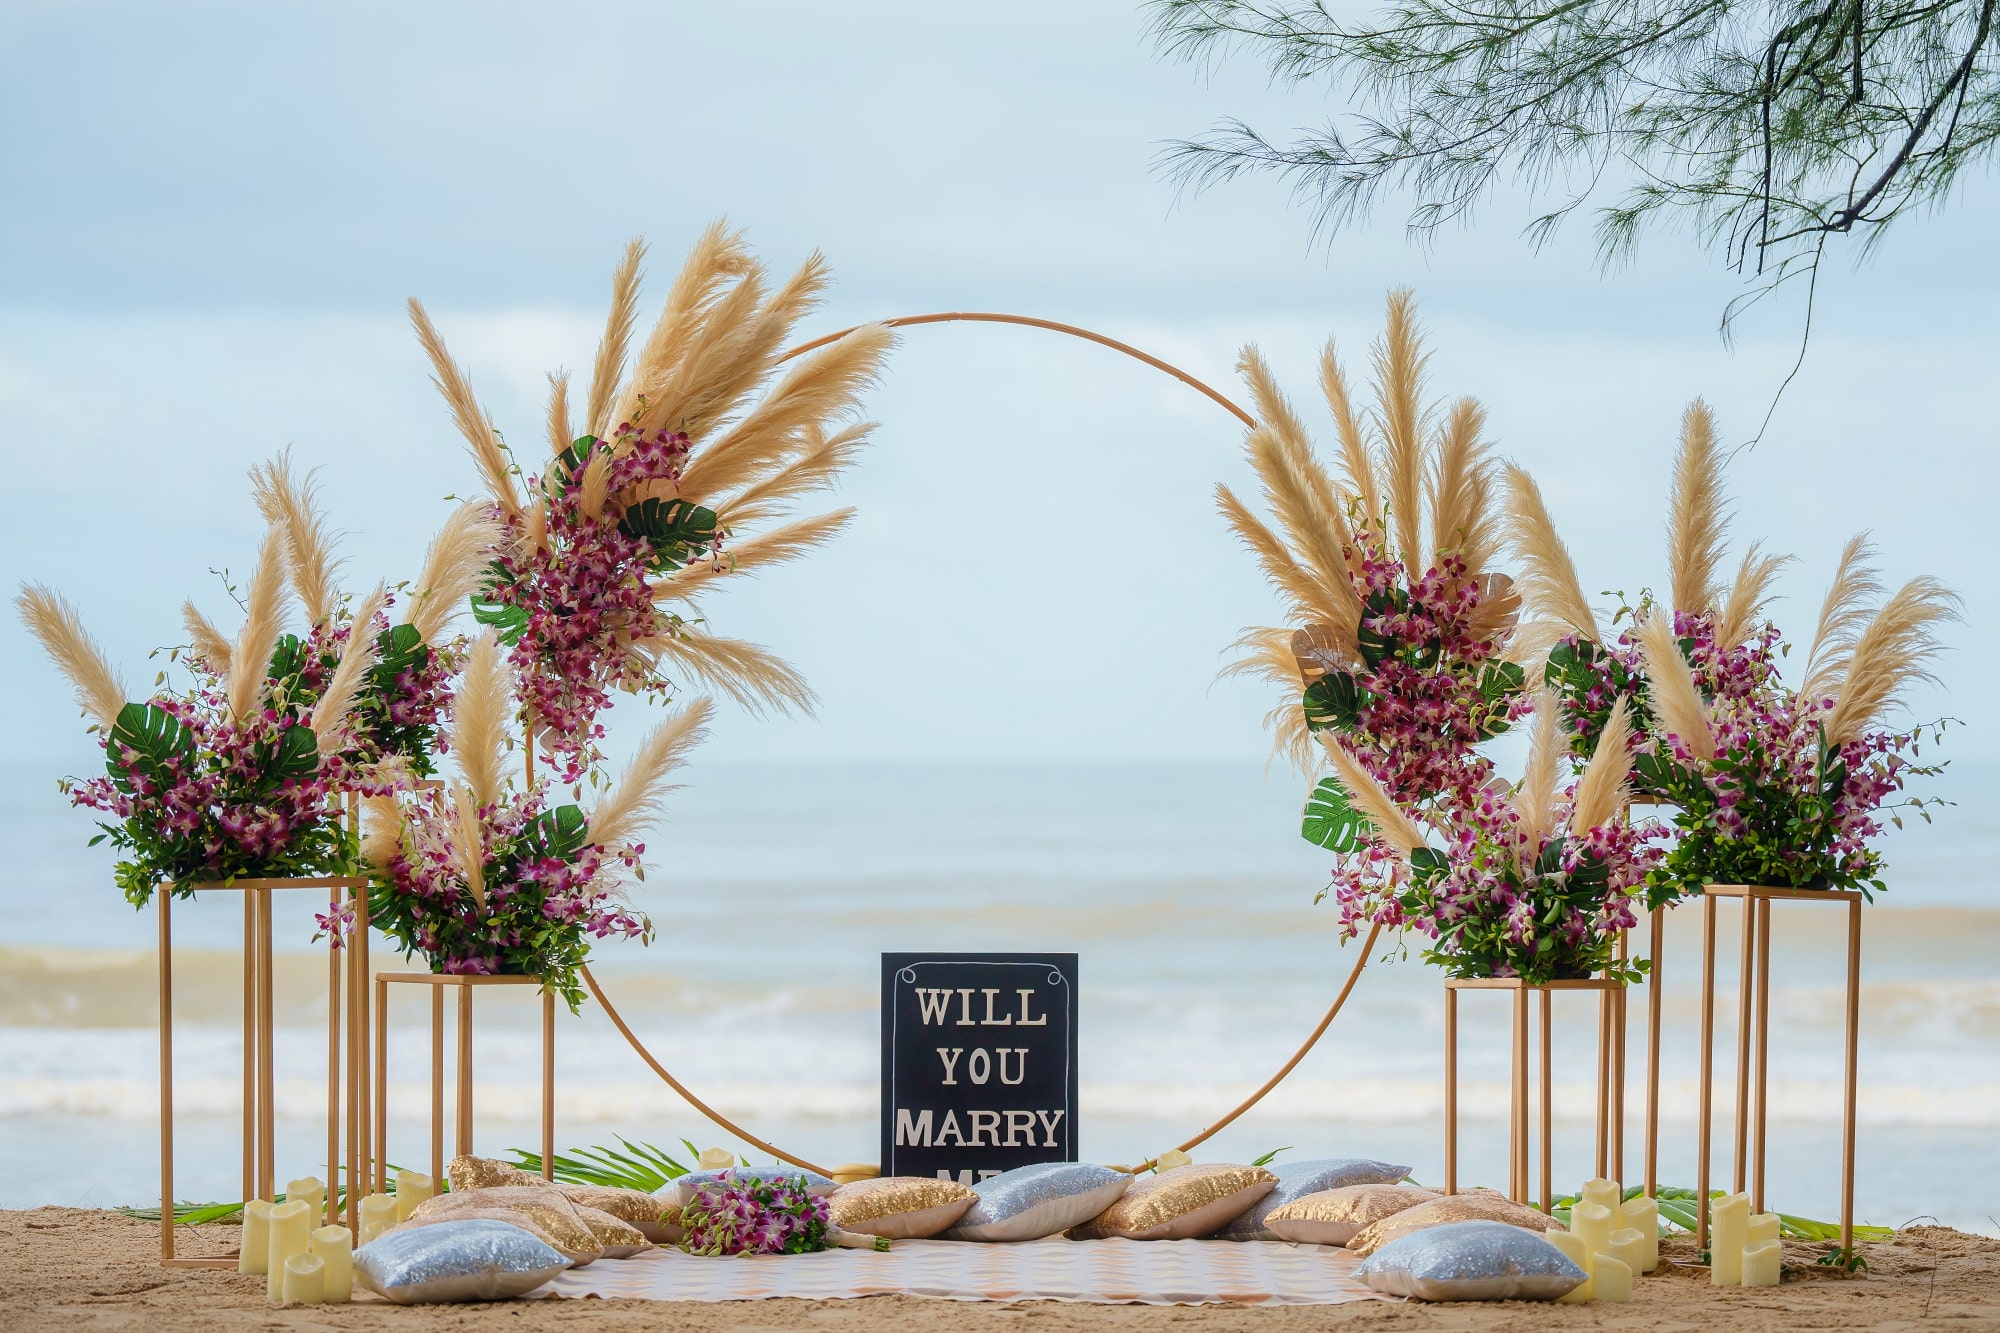 Marriage proposal with circle arch and Flowers